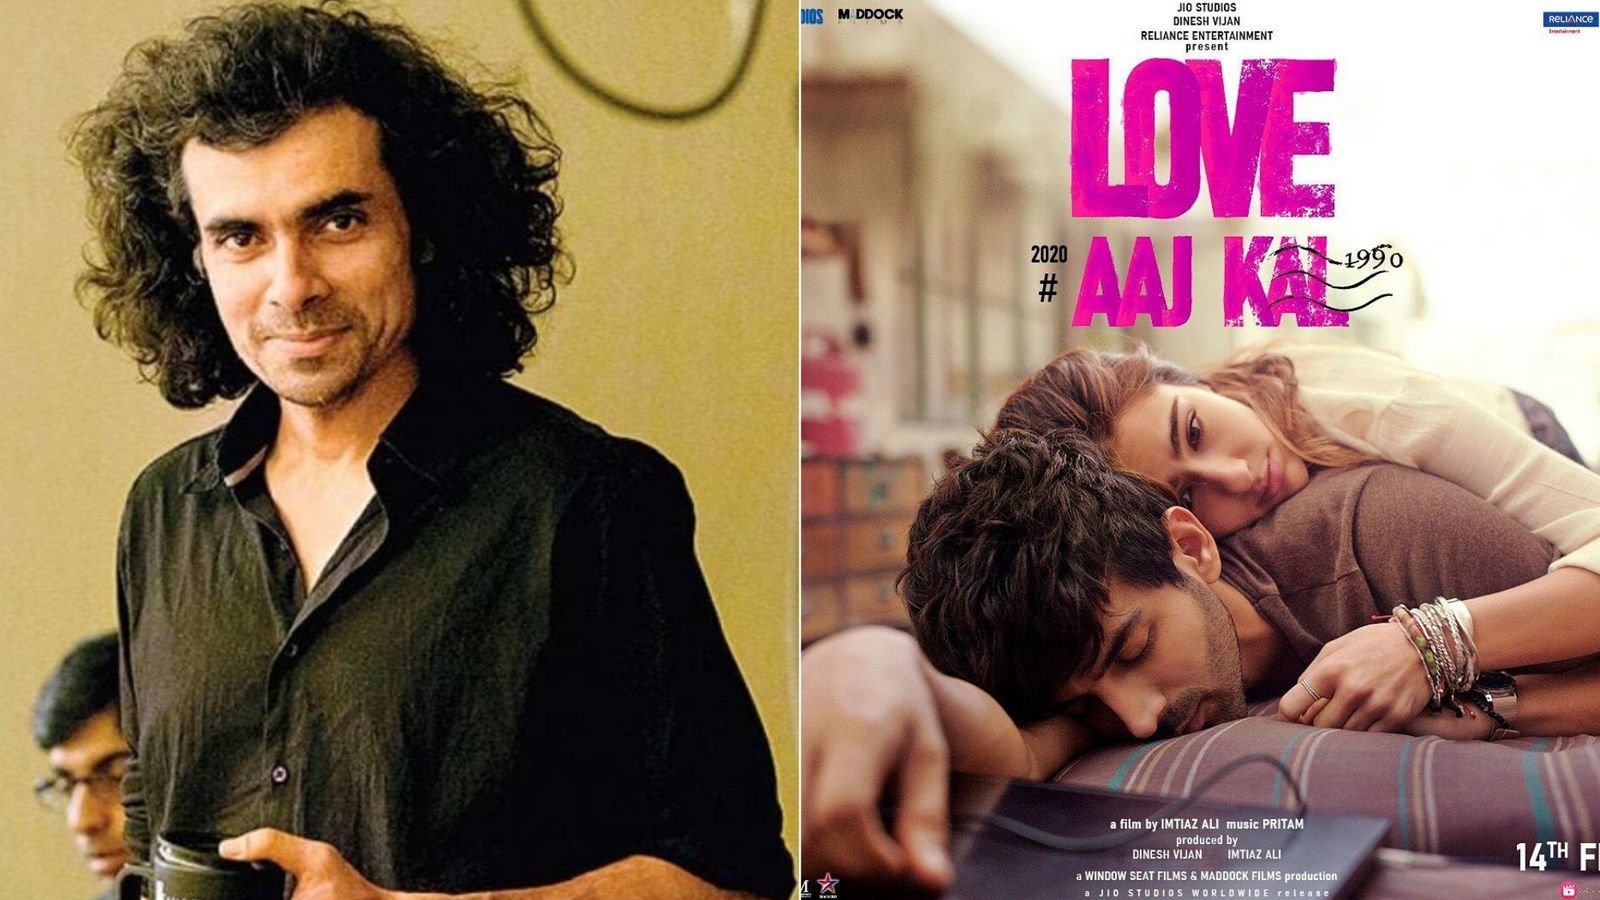 EXCLUSIVE: I’d Rather Fail Than Play Safe, Says Filmmaker Imtiaz Ali On Love Aaj Kal’s Debacle